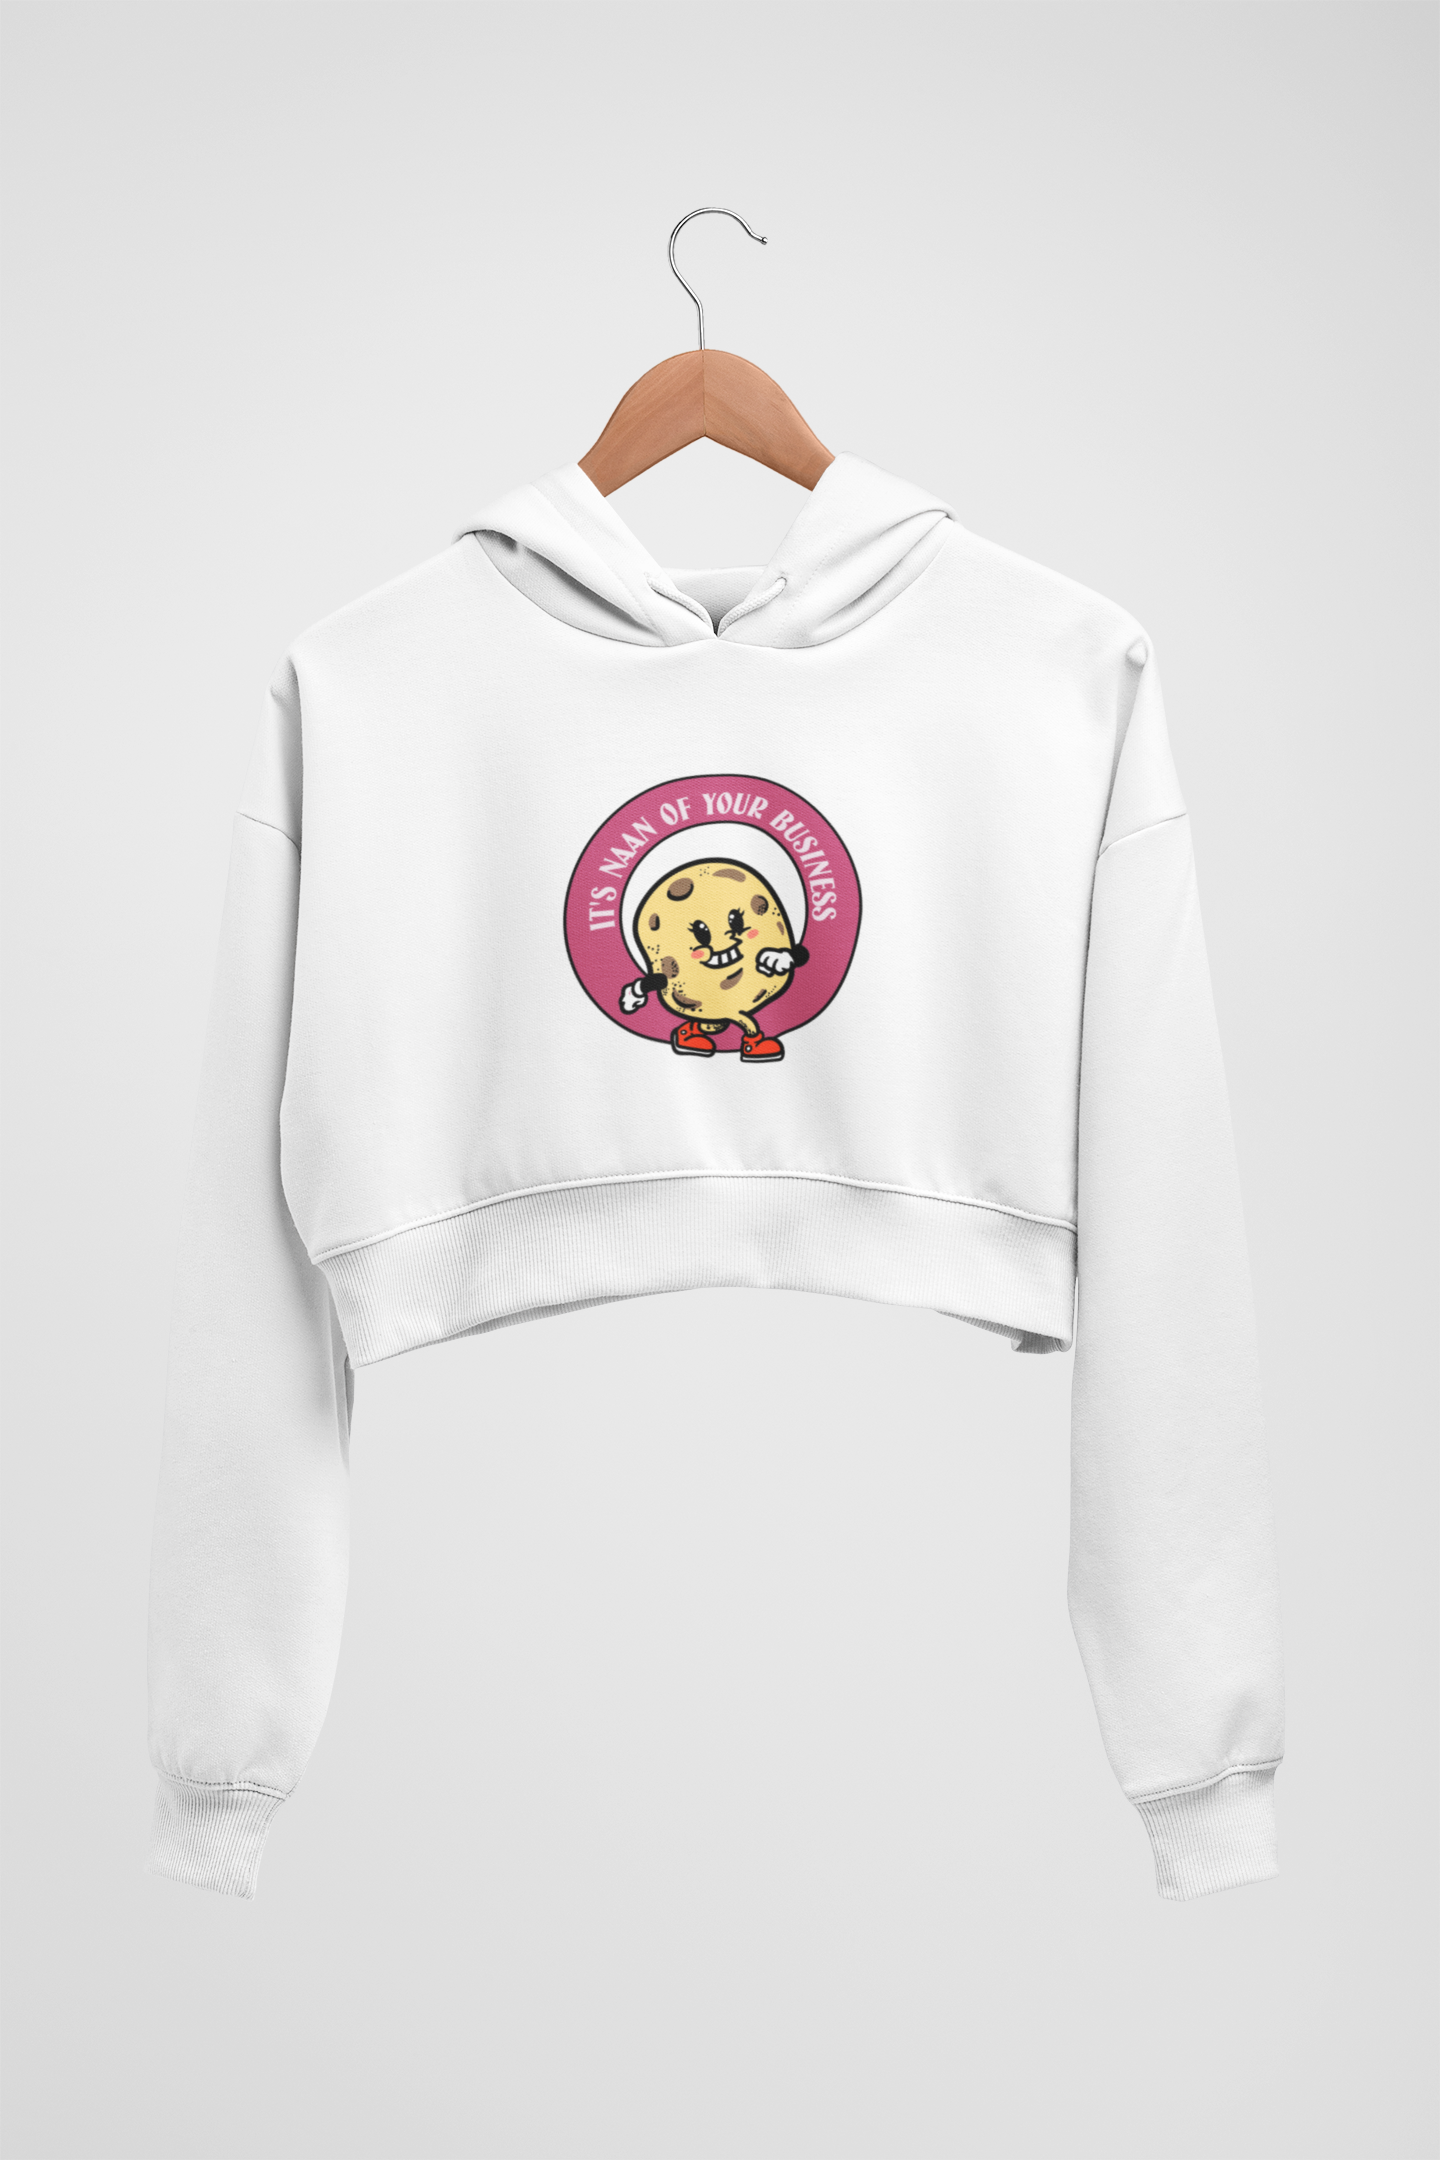 CROP HOODIES WHITE x IT'S NAAN OF YOUR BUSSINESS